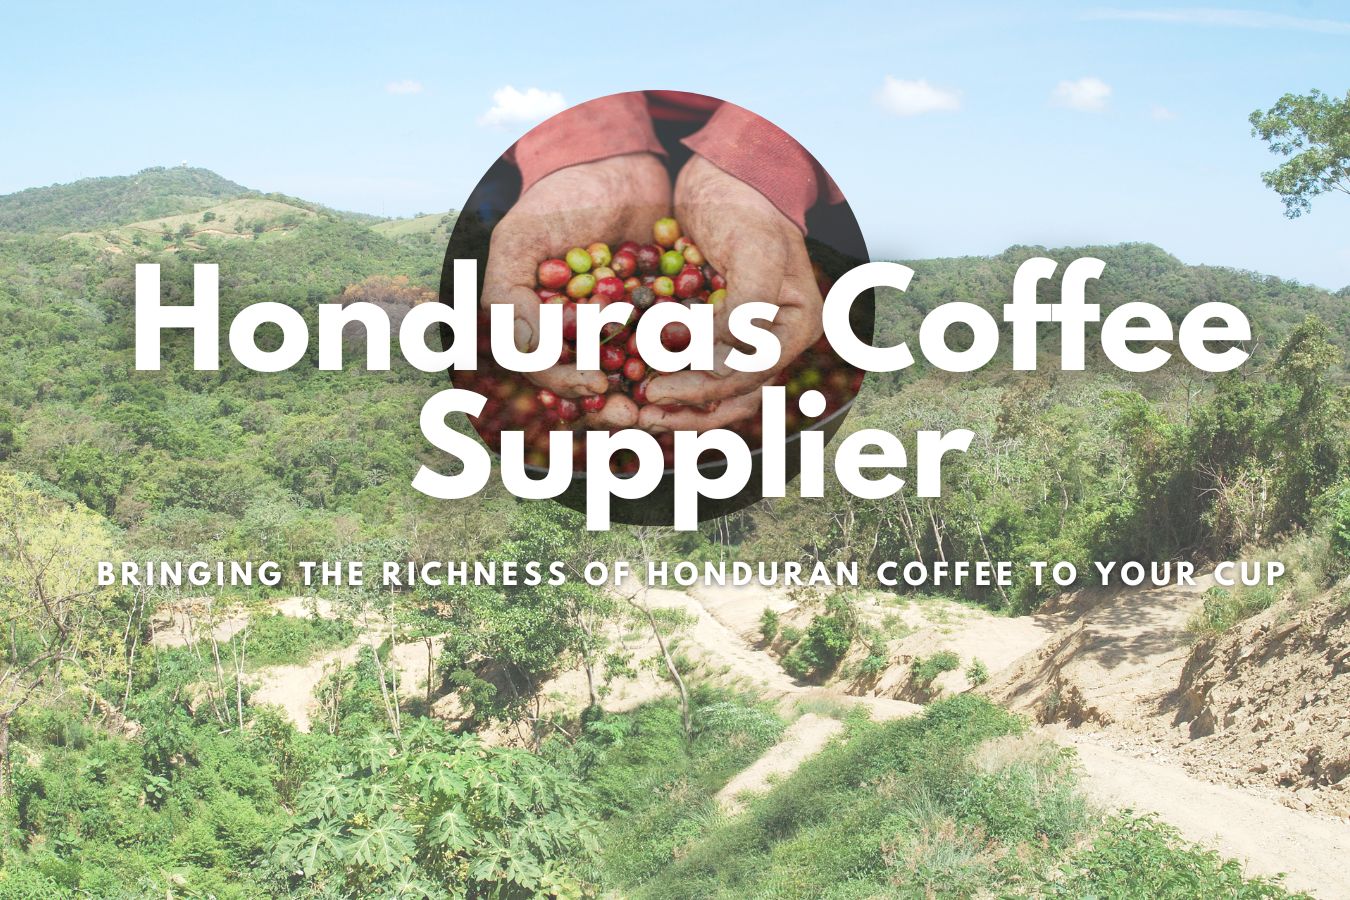 The Best Honduras Coffee Supplier Bringing the Richness of Honduran Coffee to Your Cup